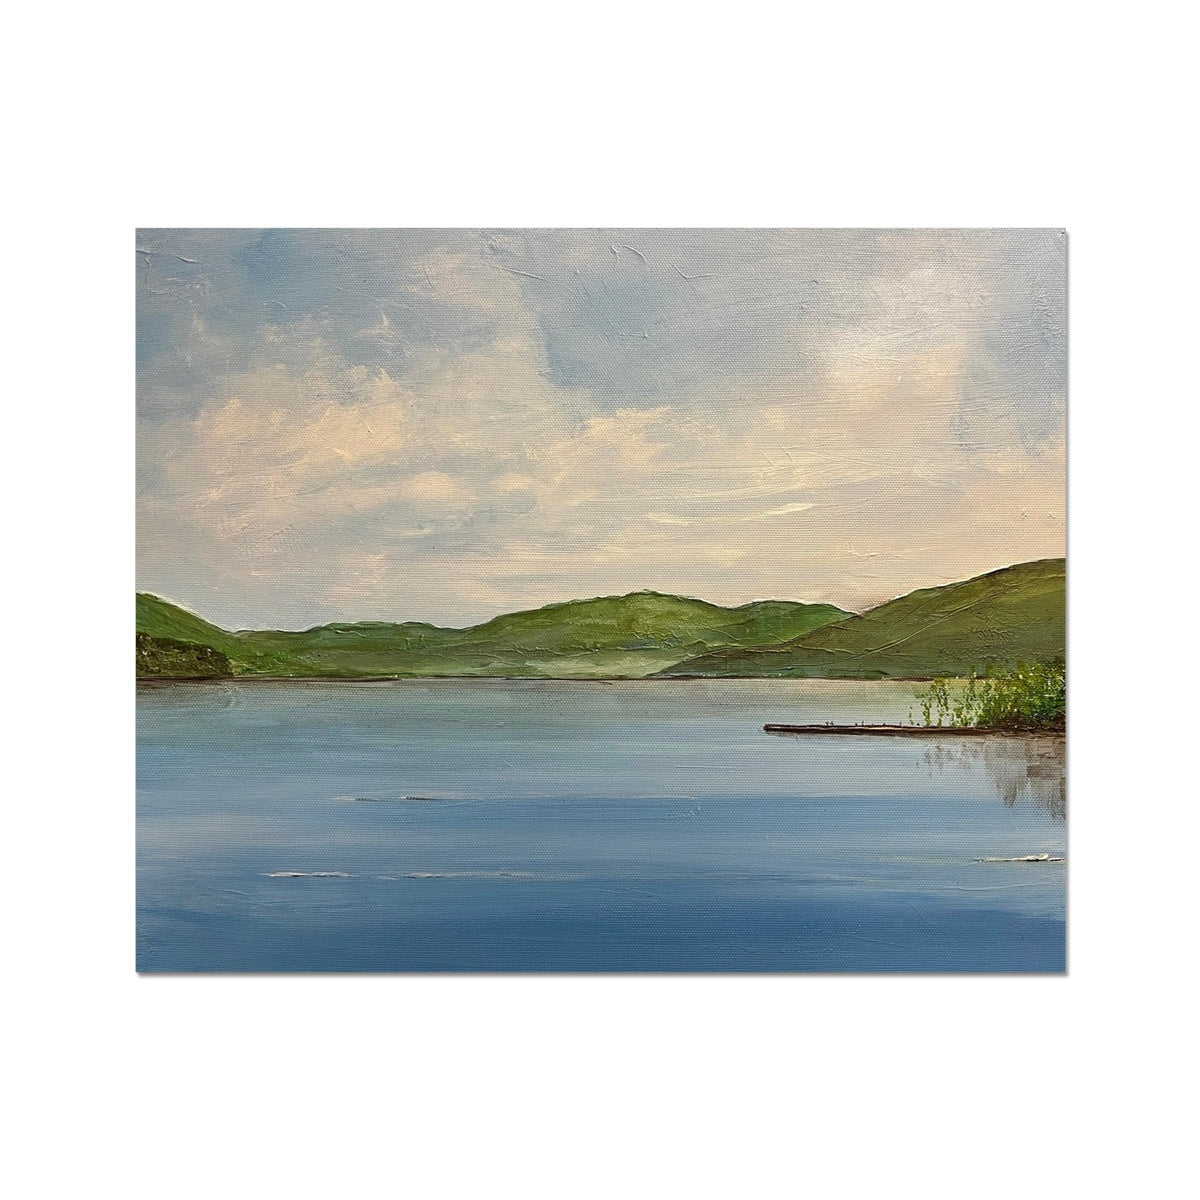 Loch Tay ii Painting | Hahnemühle German Etching Prints From Scotland-Fine art-Scottish Lochs & Mountains Art Gallery-20"x16"-Paintings, Prints, Homeware, Art Gifts From Scotland By Scottish Artist Kevin Hunter